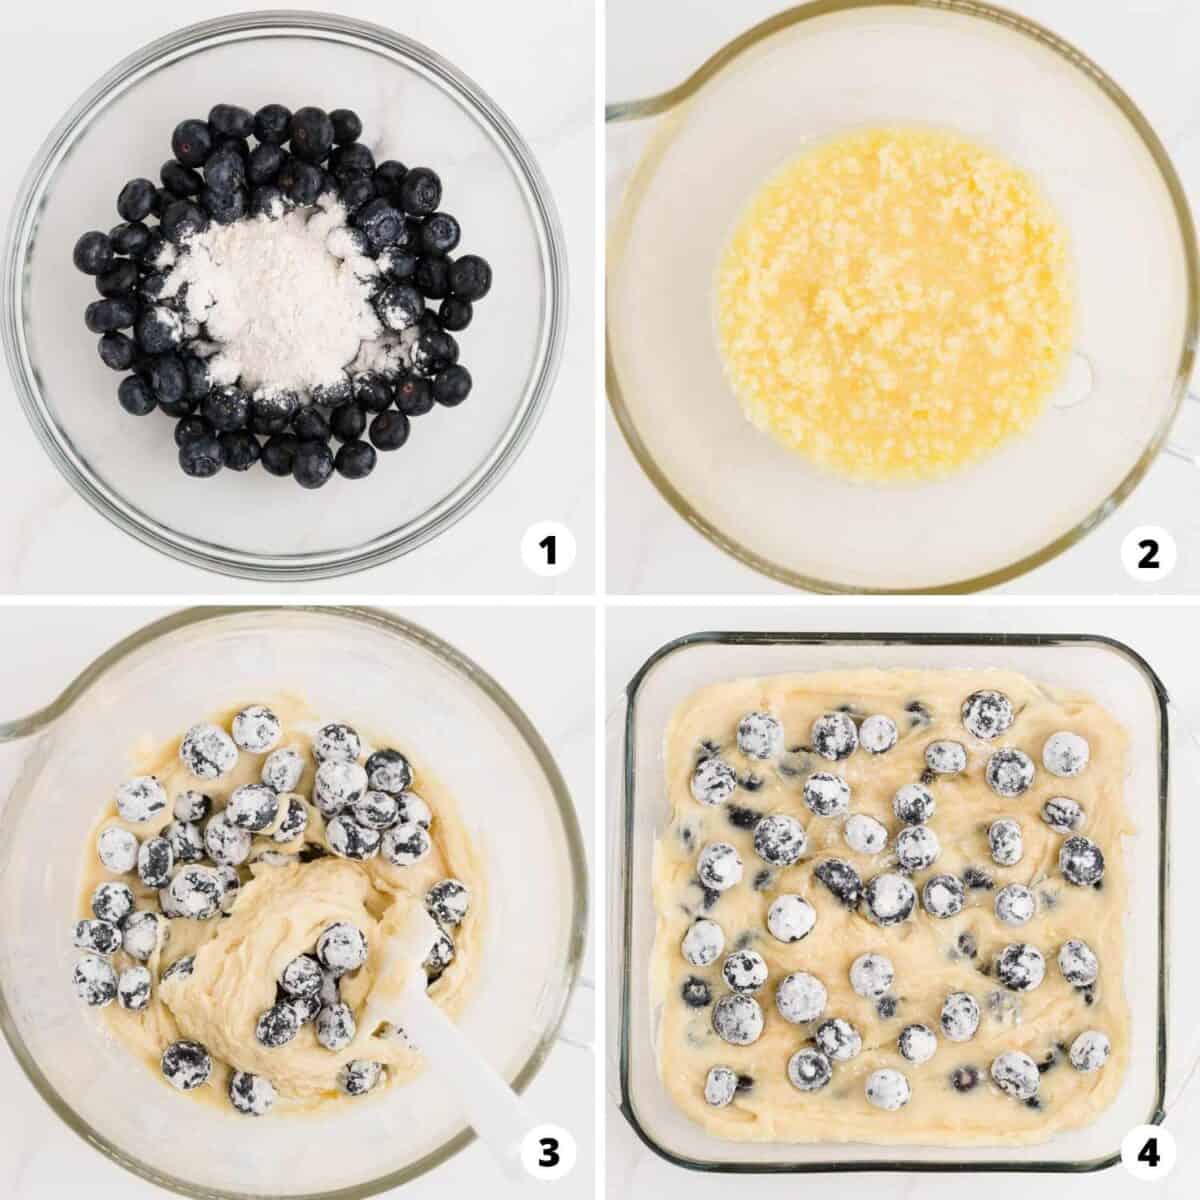 How to make blueberry buttermilk cake collage.